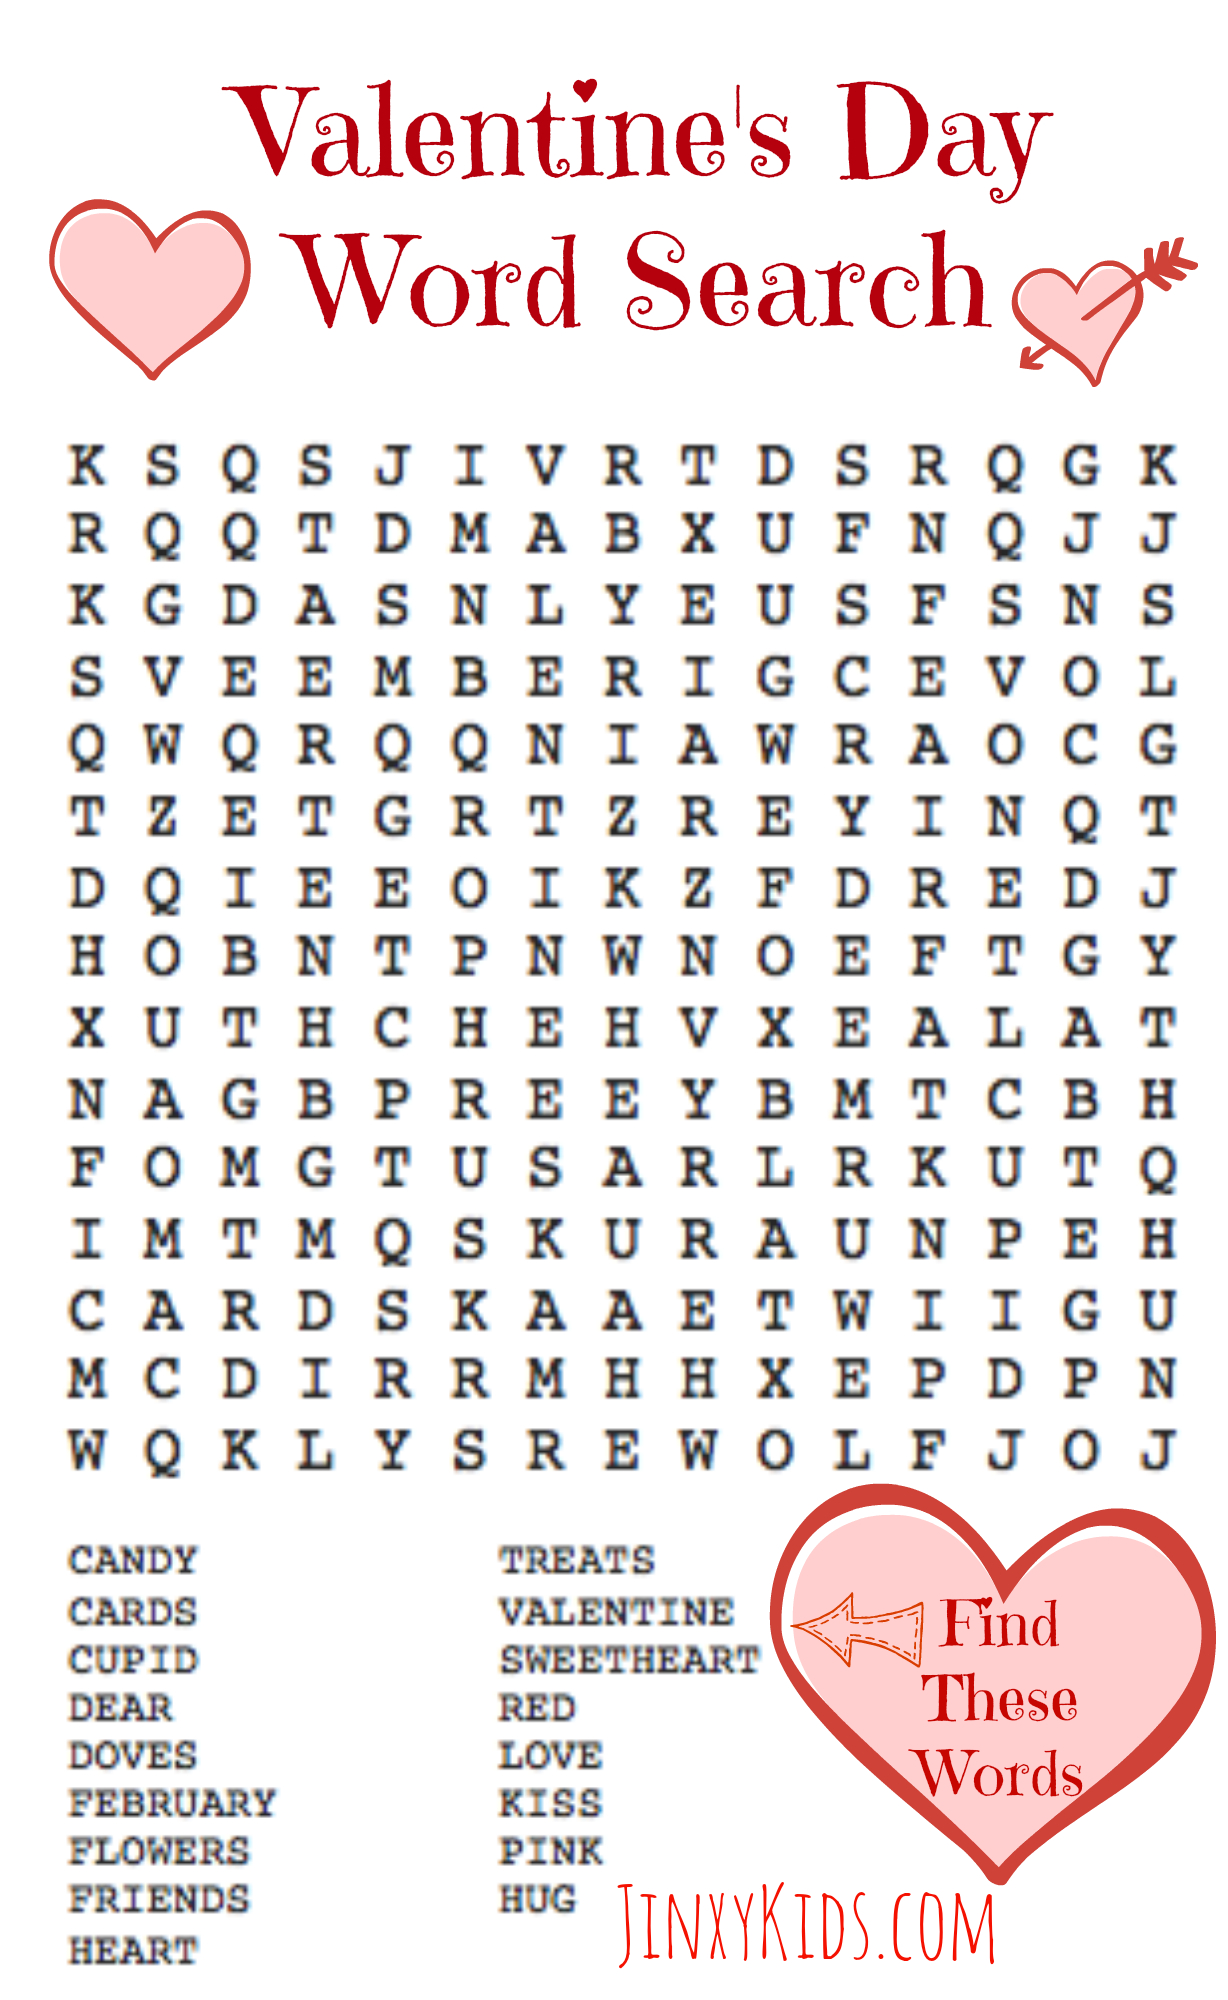 Valentine's Day Wordsearch English Esl Worksheets For Word Search